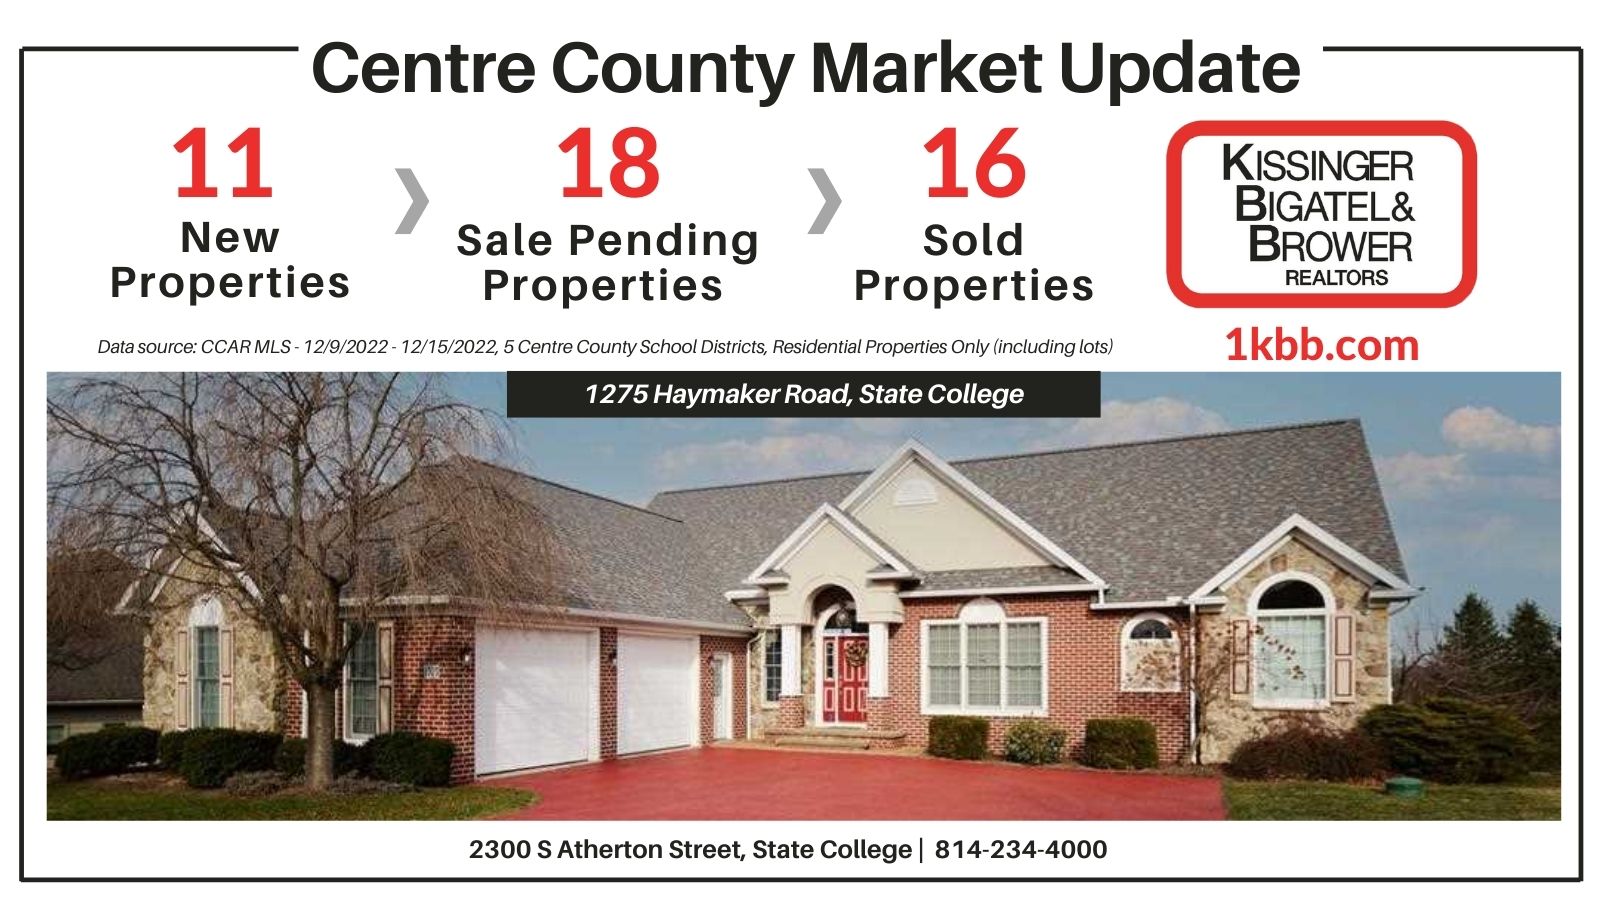 Market Update Report for 12/9-12/15/2022 in Centre County, PA